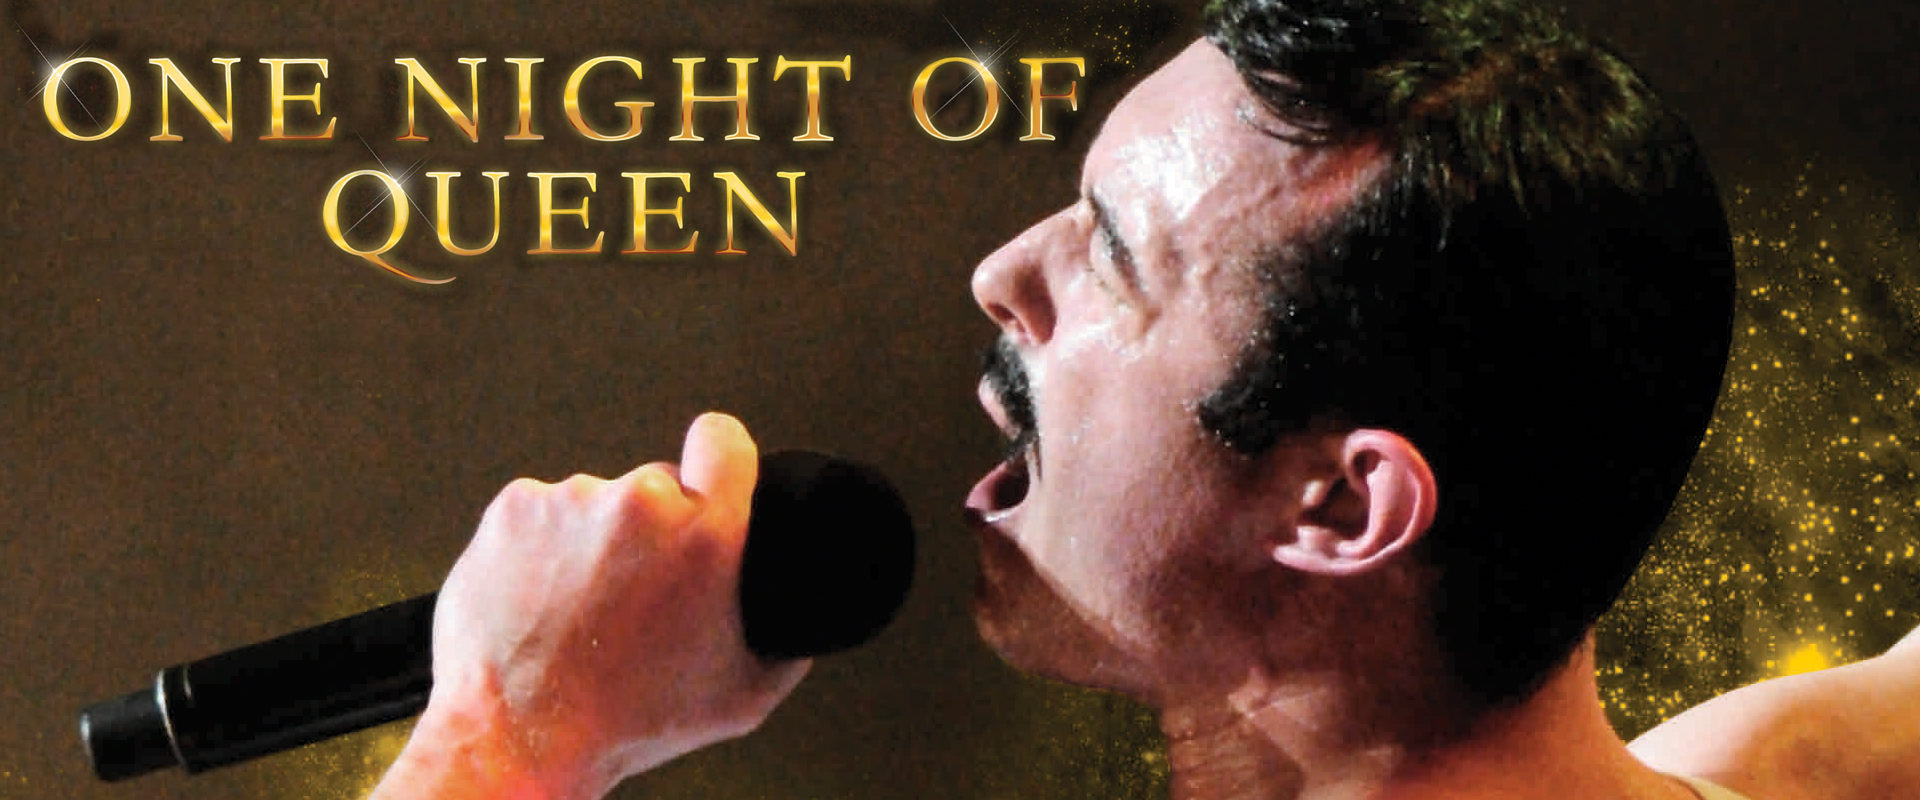 One Night of Queen image